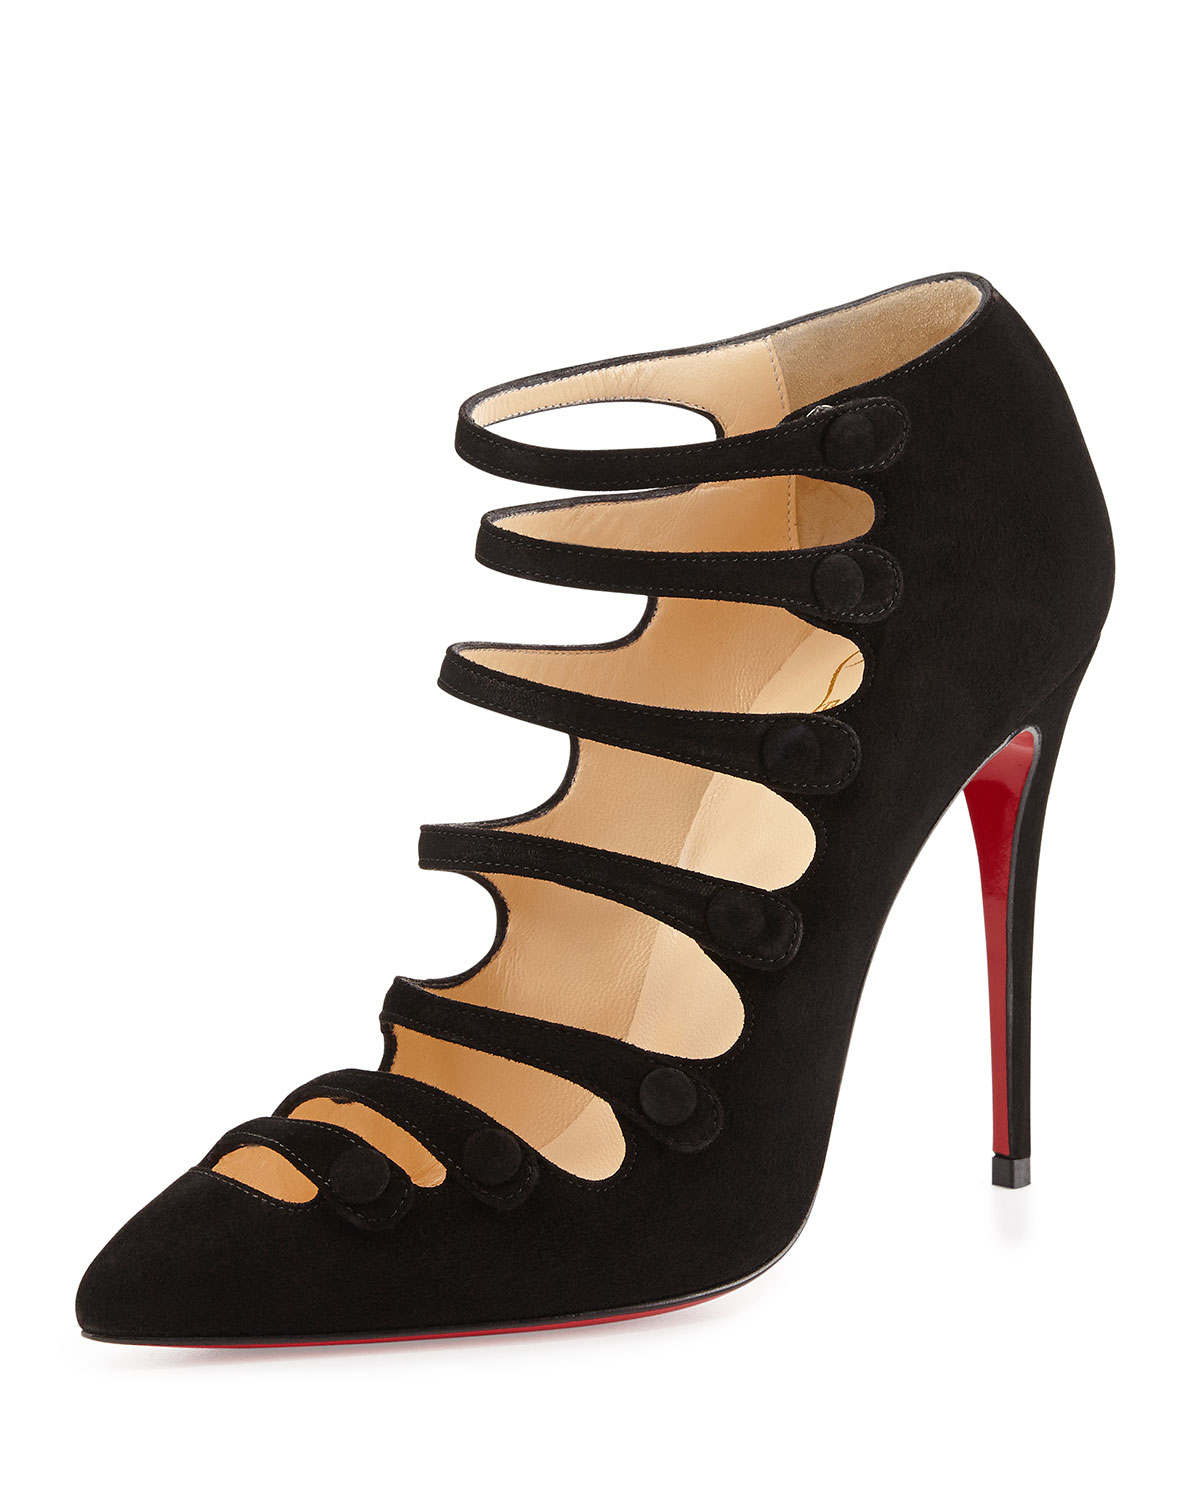 christian louboutin men sneakers - Christian louboutin Viennana Suede Red Sole Bootie in Black | Lyst